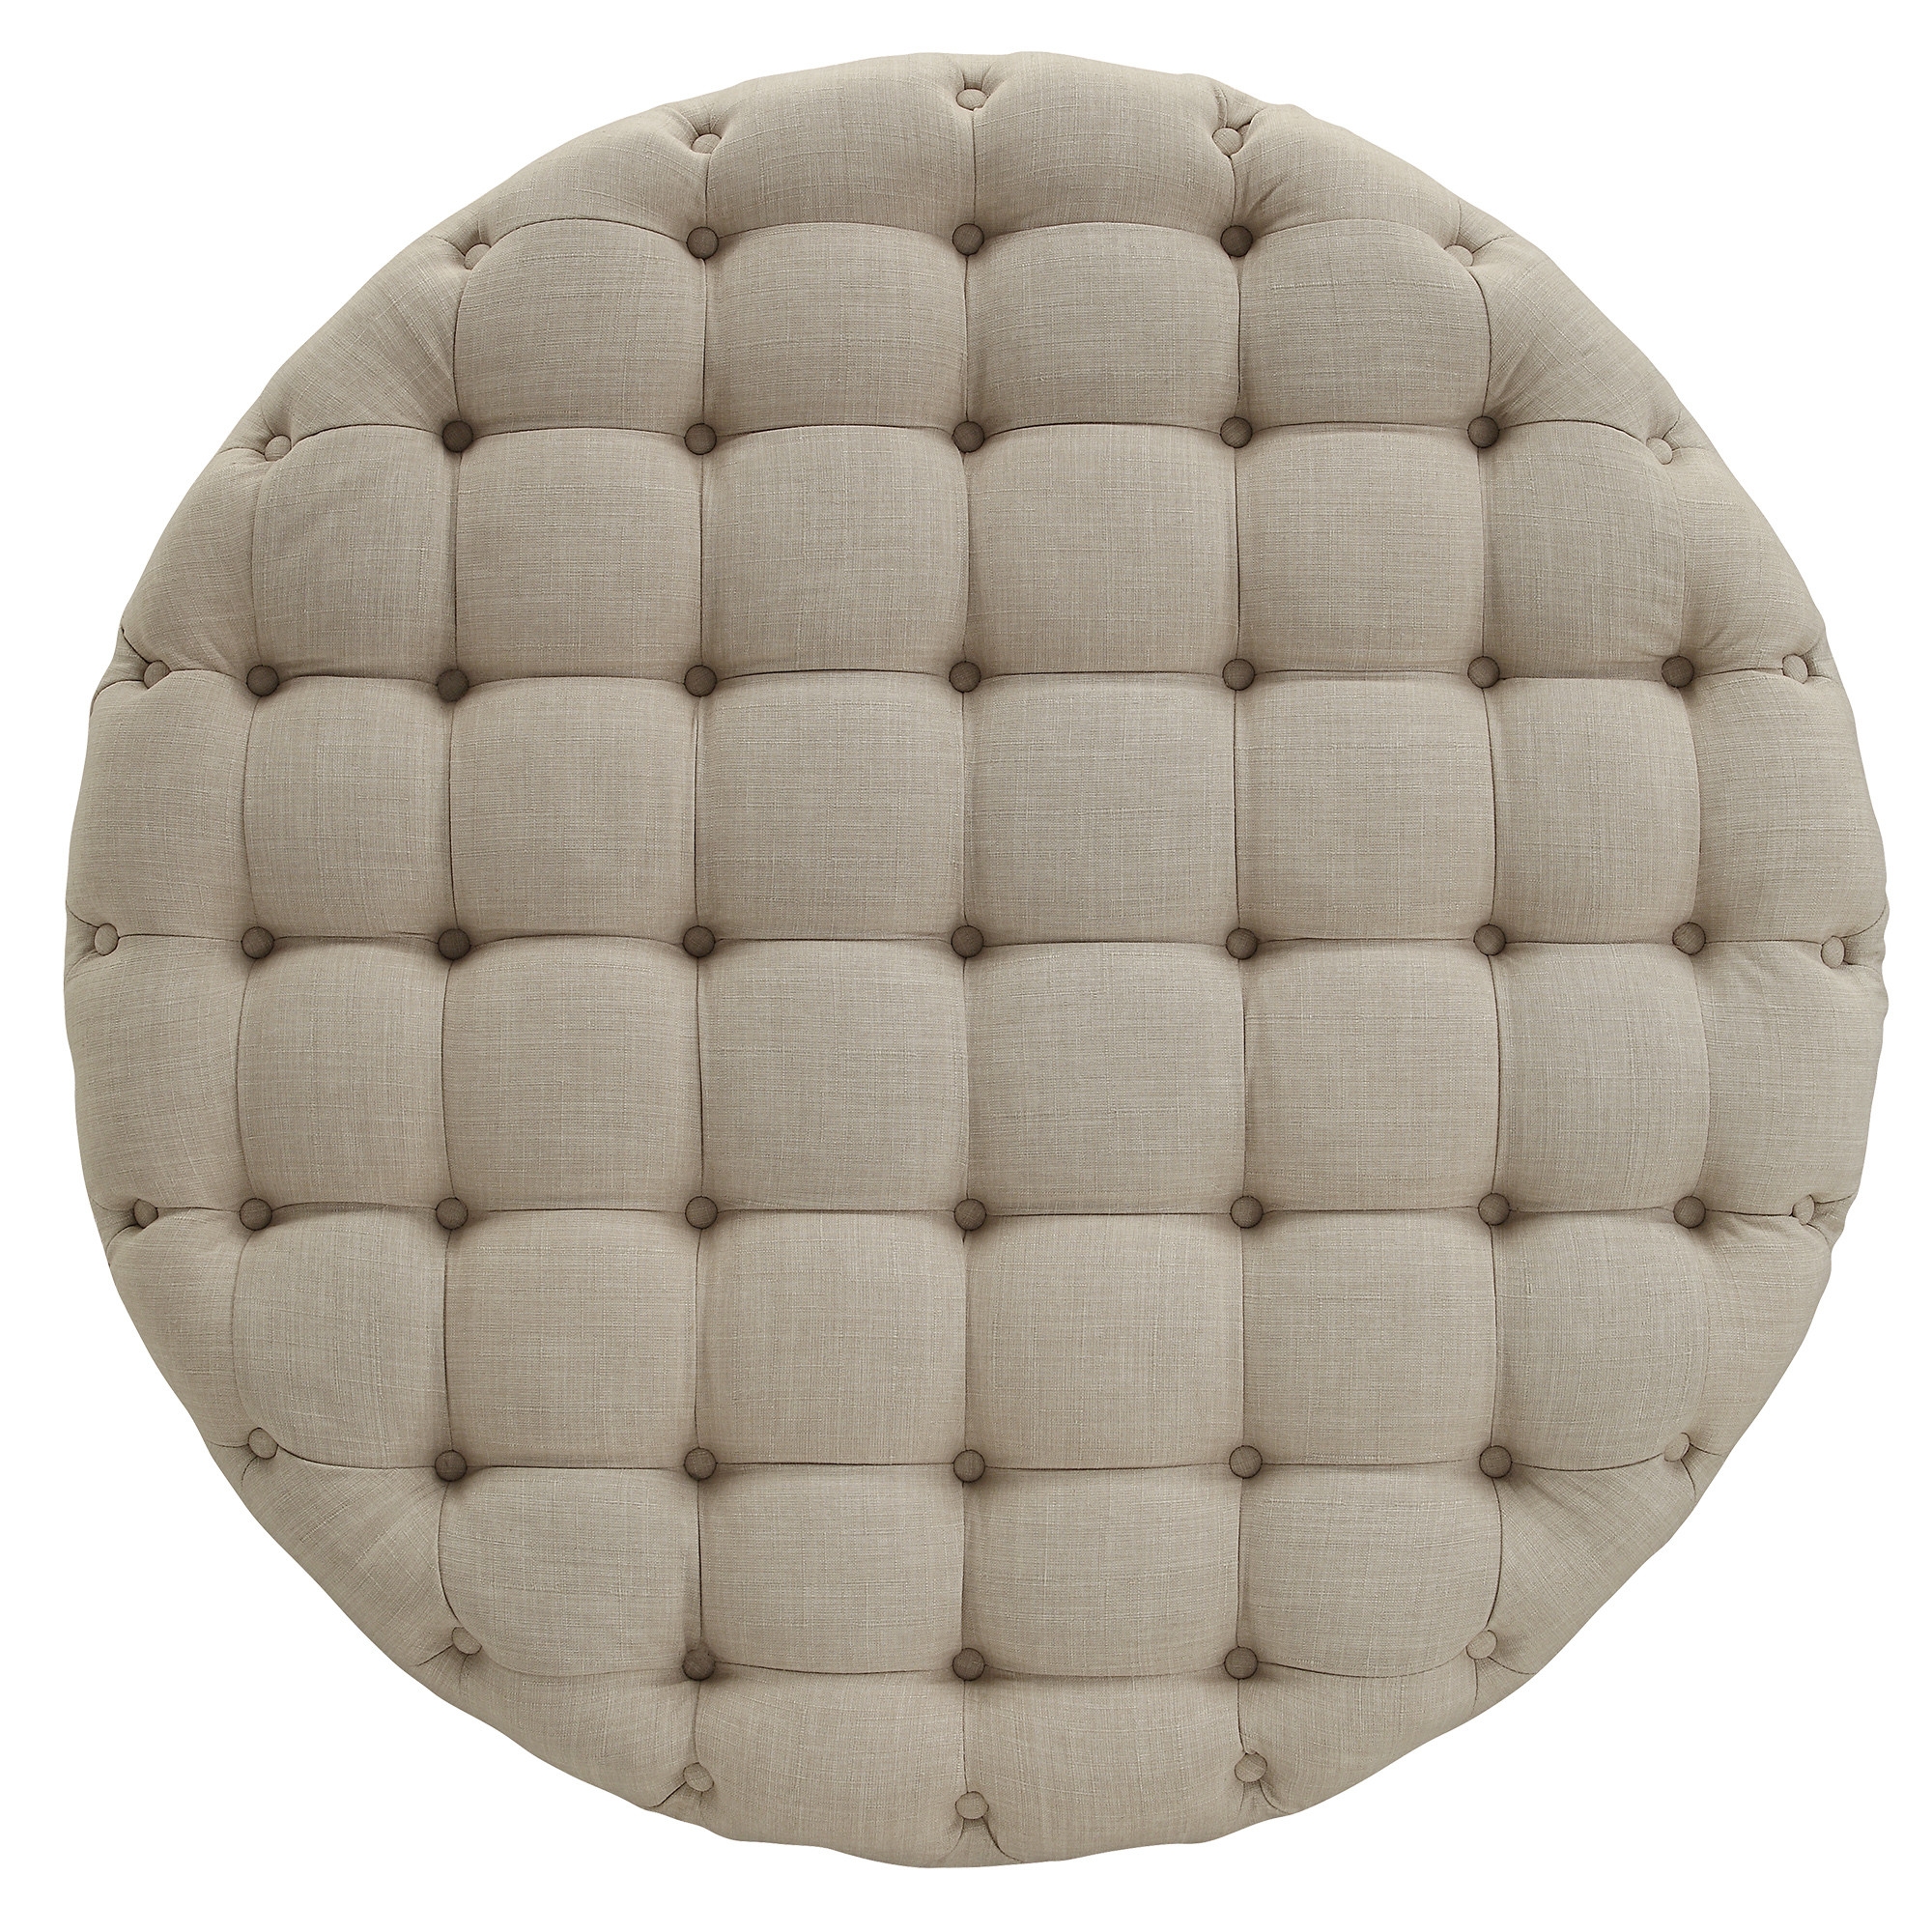 Bourges Round Tufted Cocktail Ottoman - Beige - Image 1